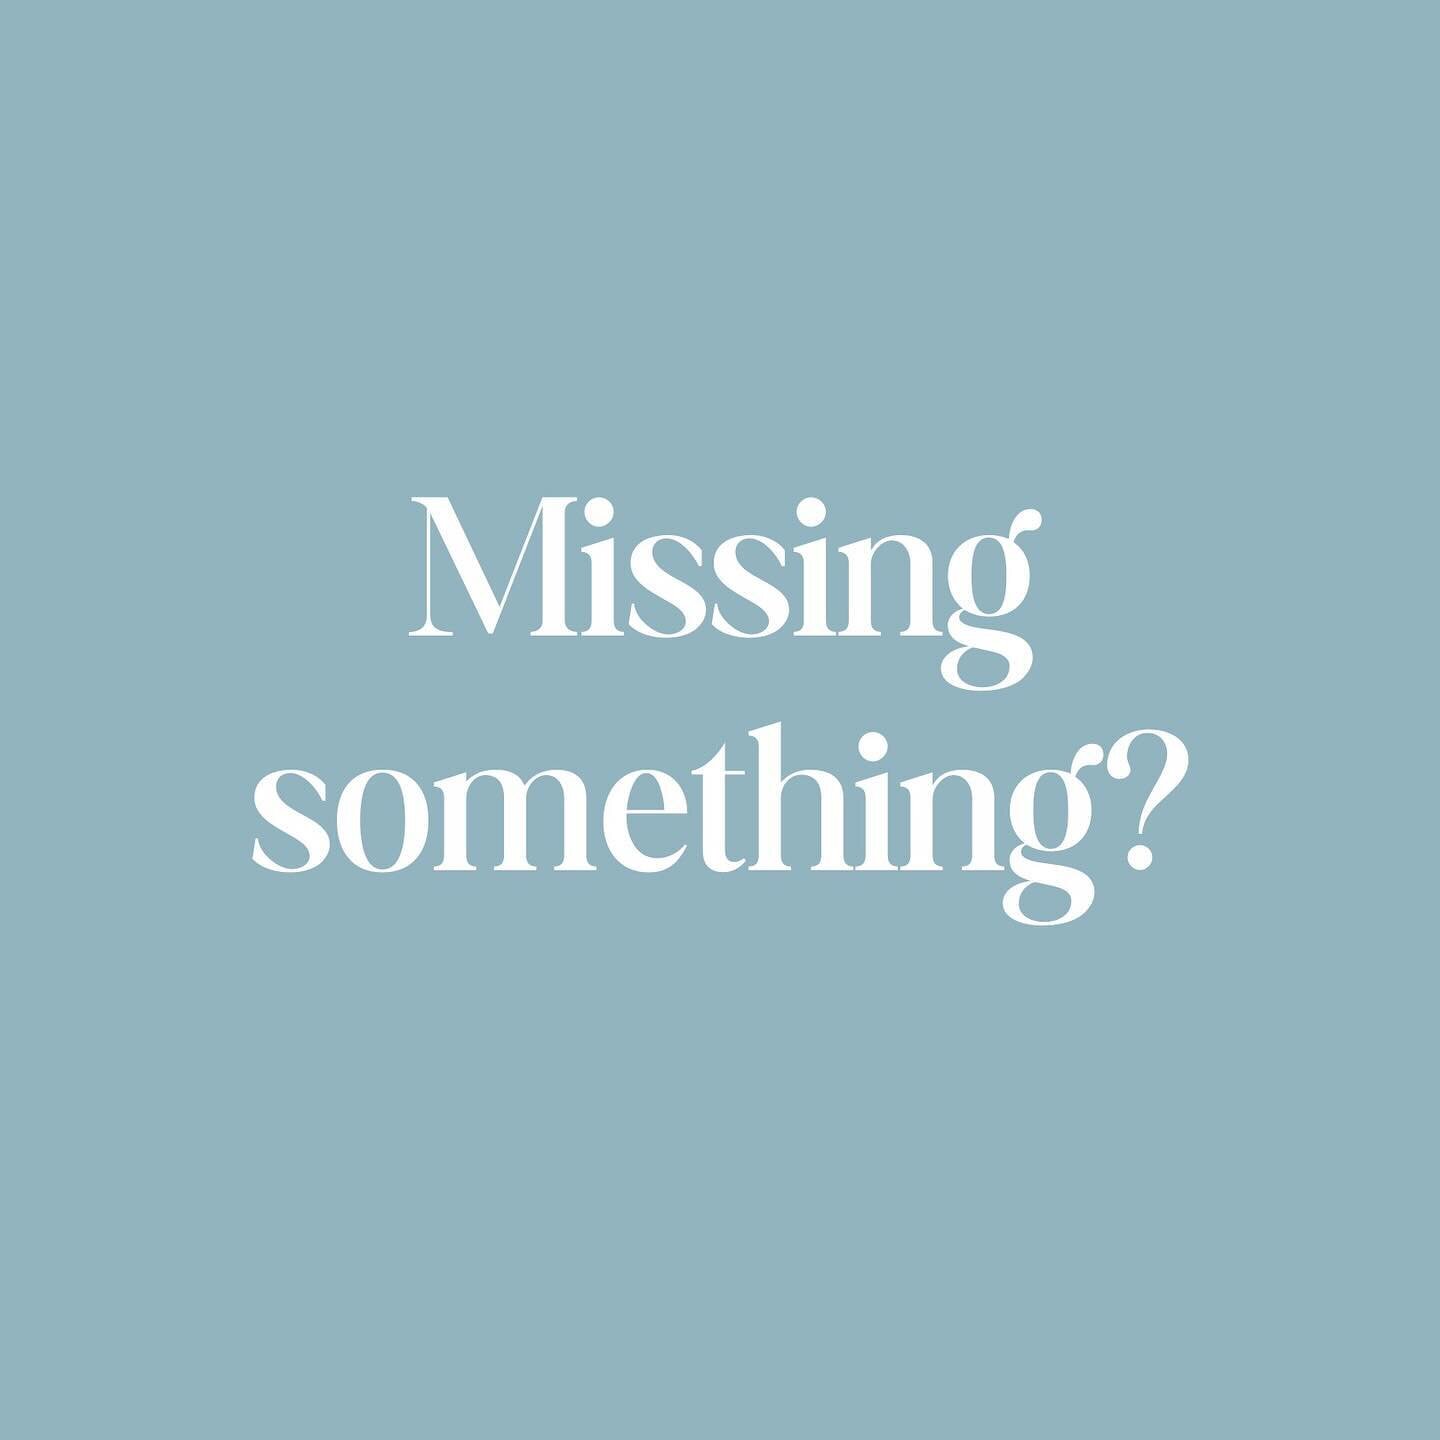 Missing something? Are you looking for your water bottle? Maybe a tank top? Or even your yoga mat? Come by the studio and check our lost and found out, it is overflowing with lost items this winter. We&rsquo;re cleaning up our nest over the weekend a